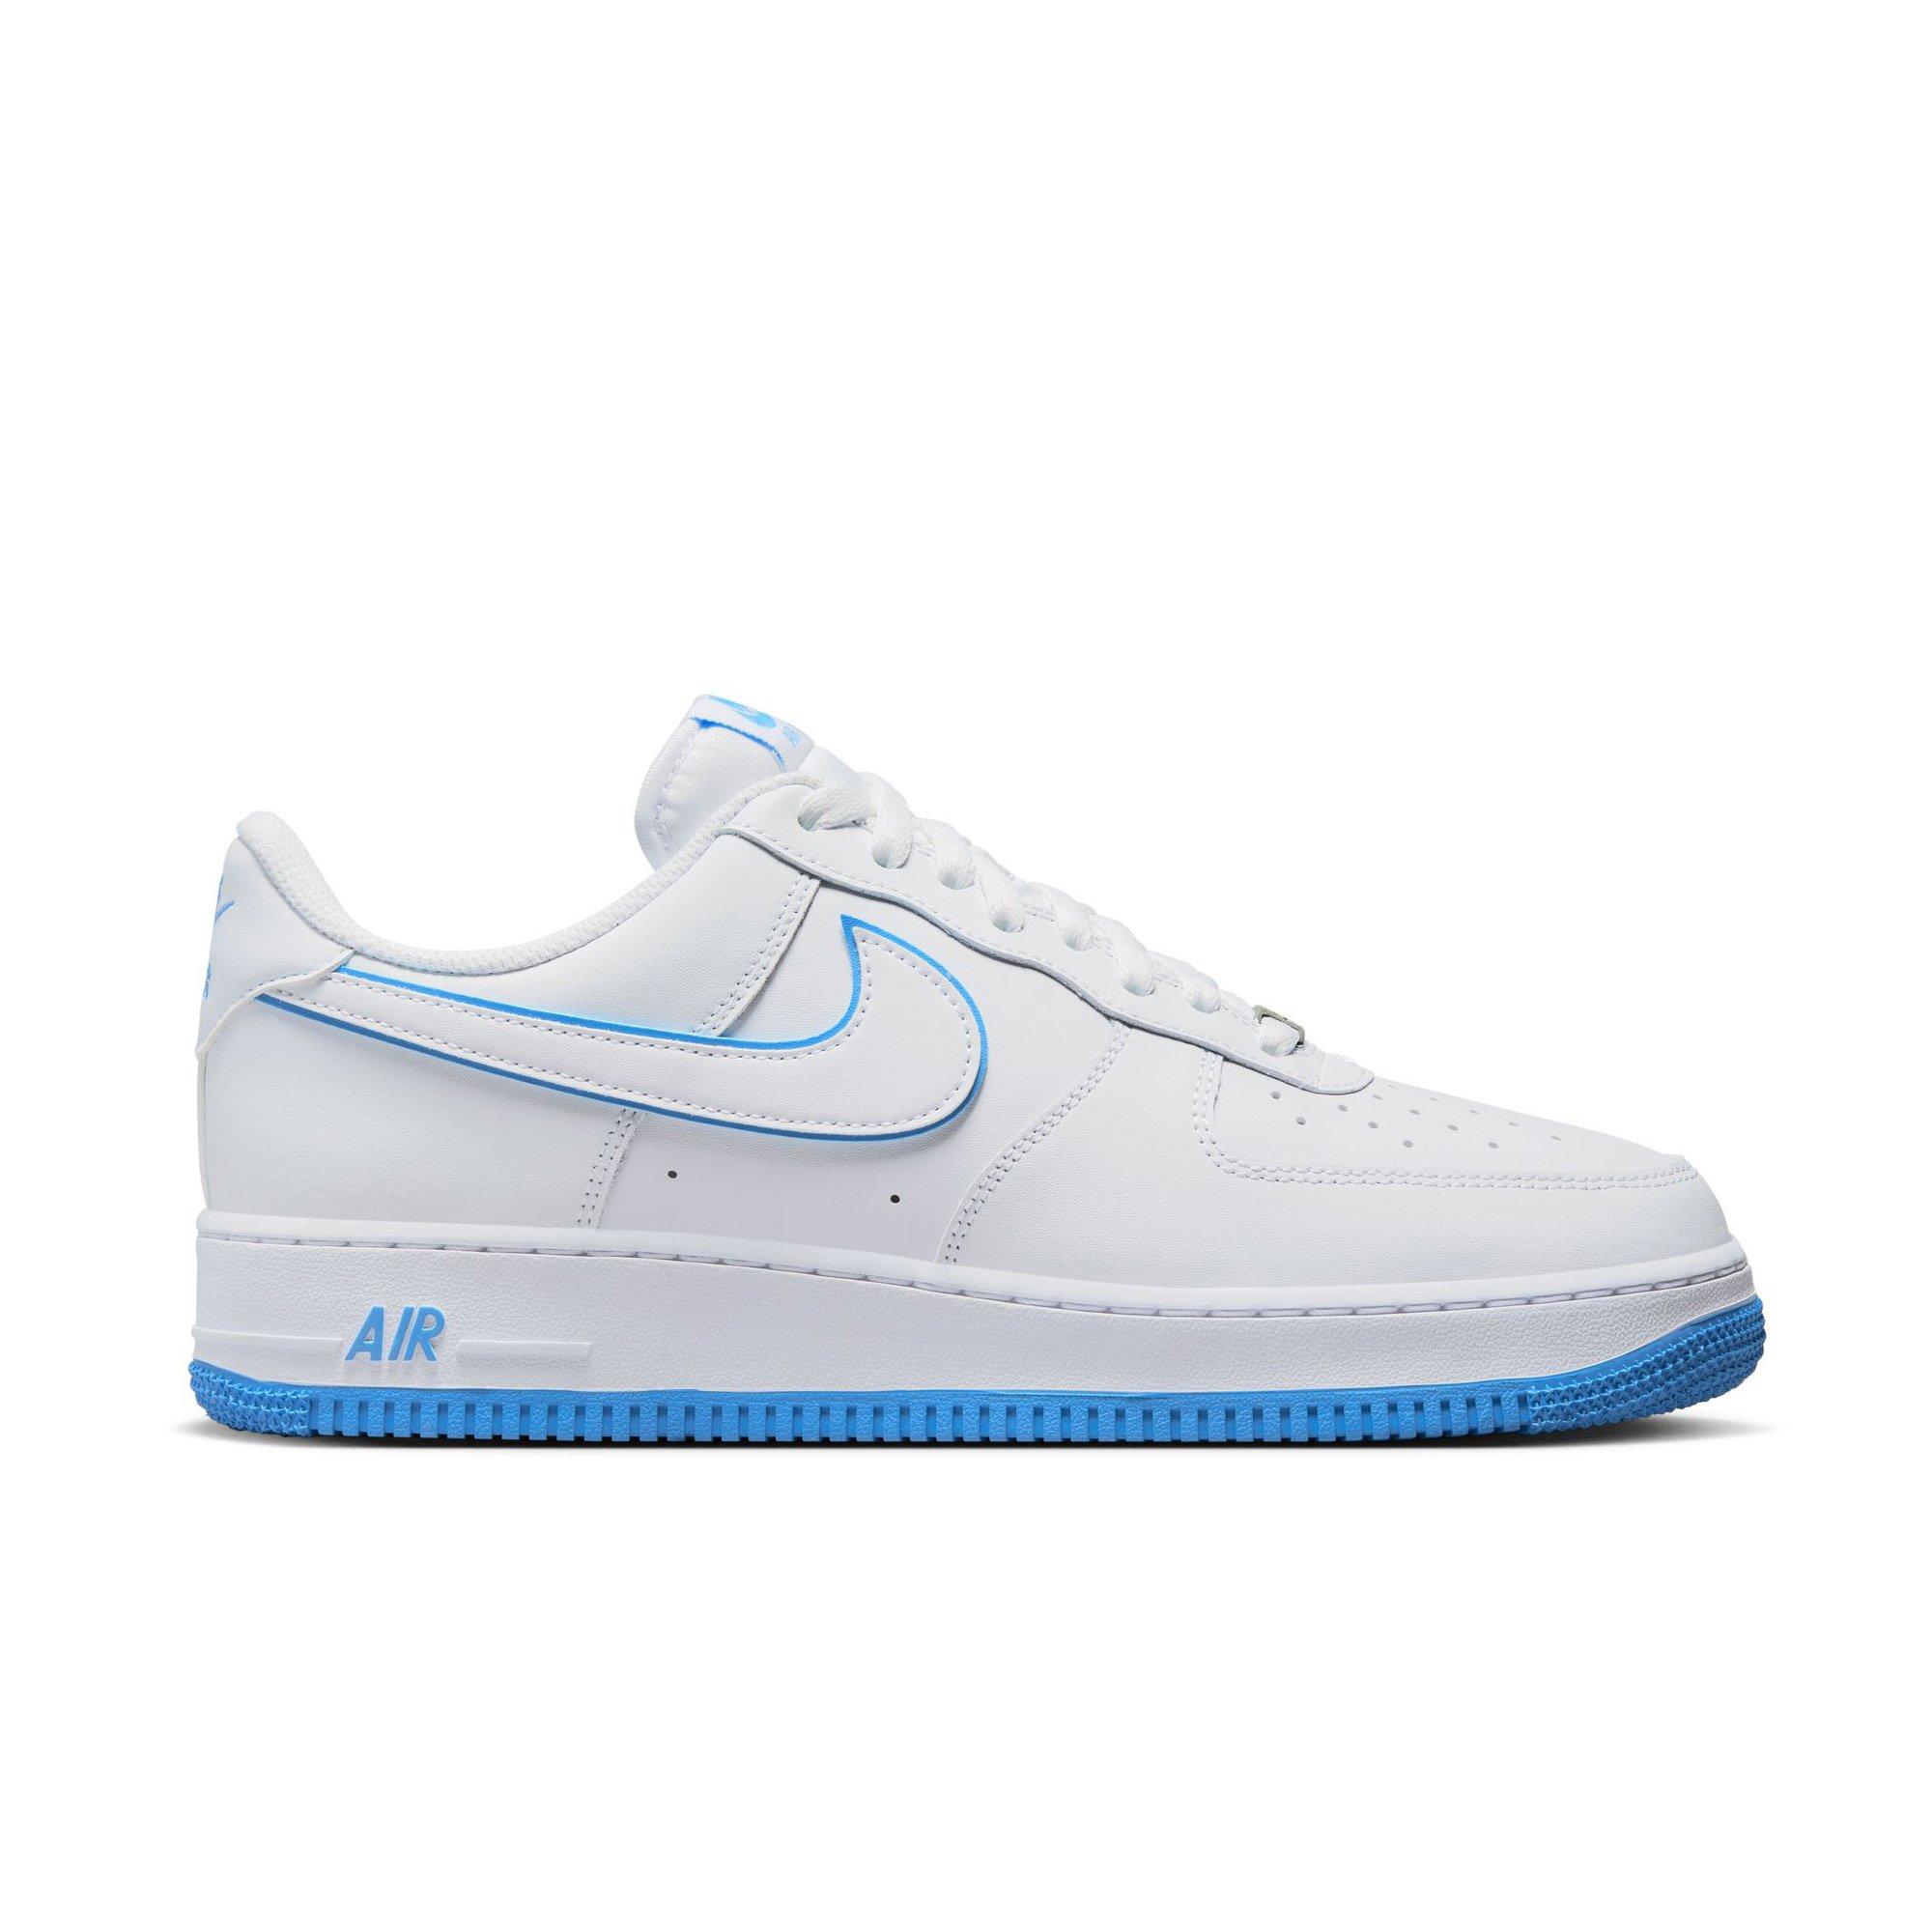 Nike Air Force 1 High '07 LV8 Men's Shoes White/Wolf Grey/Pure Platinum  806403-105